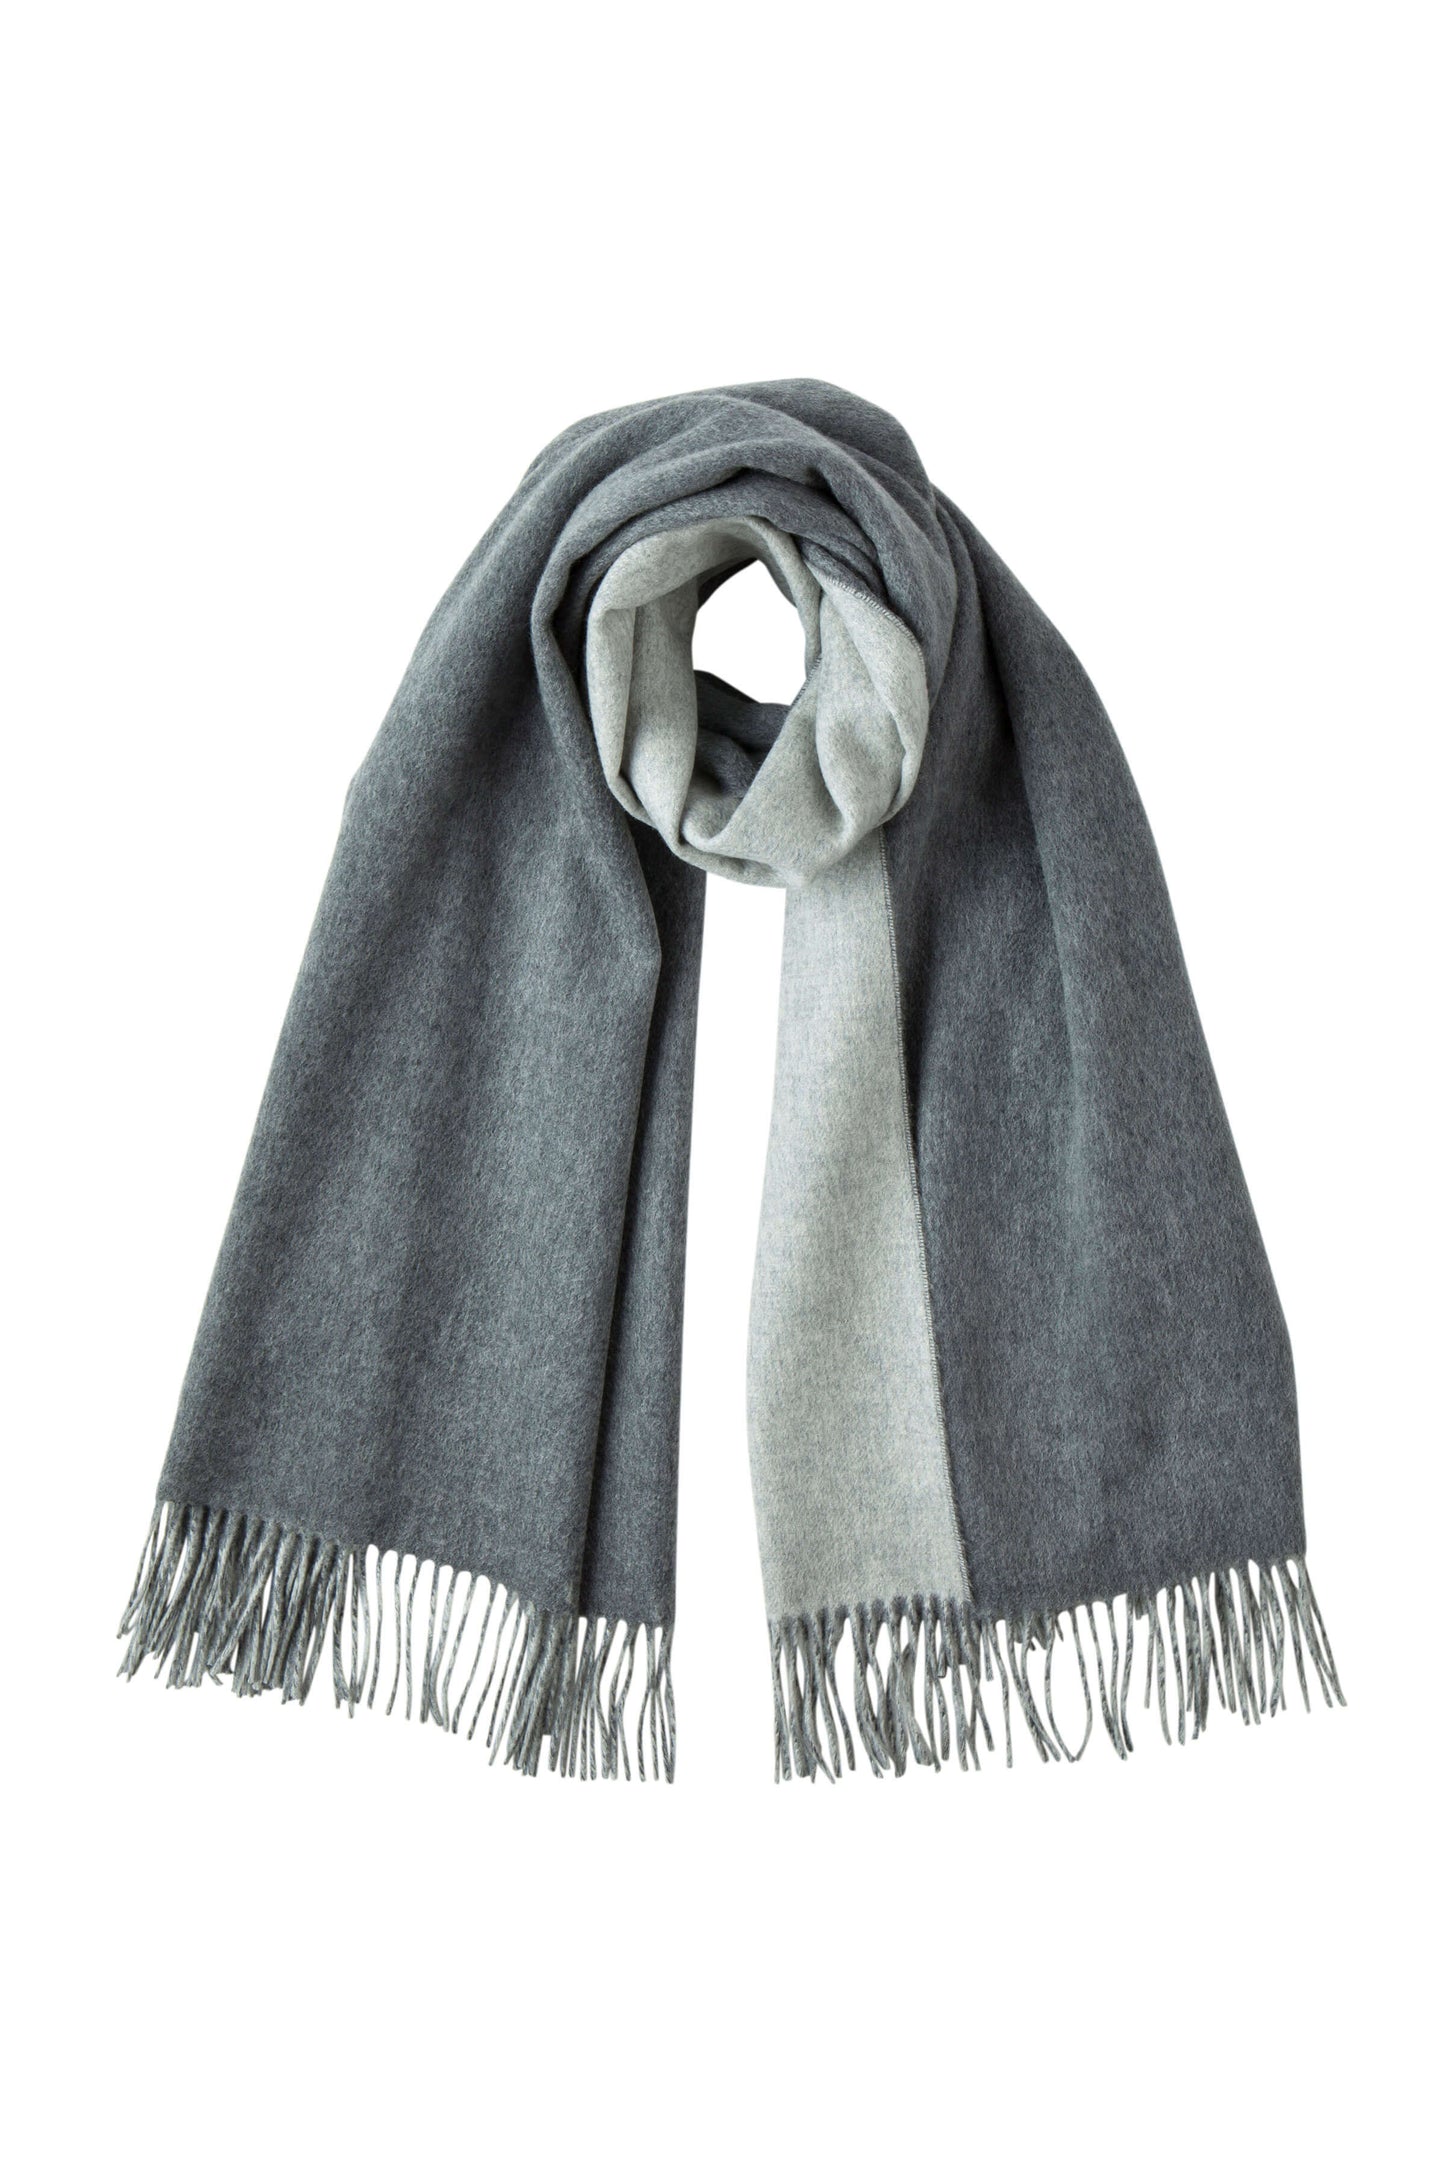 Johnstons of Elgin Reversible Cashmere Stole in Grey on a white background WA000585RU5245ONE